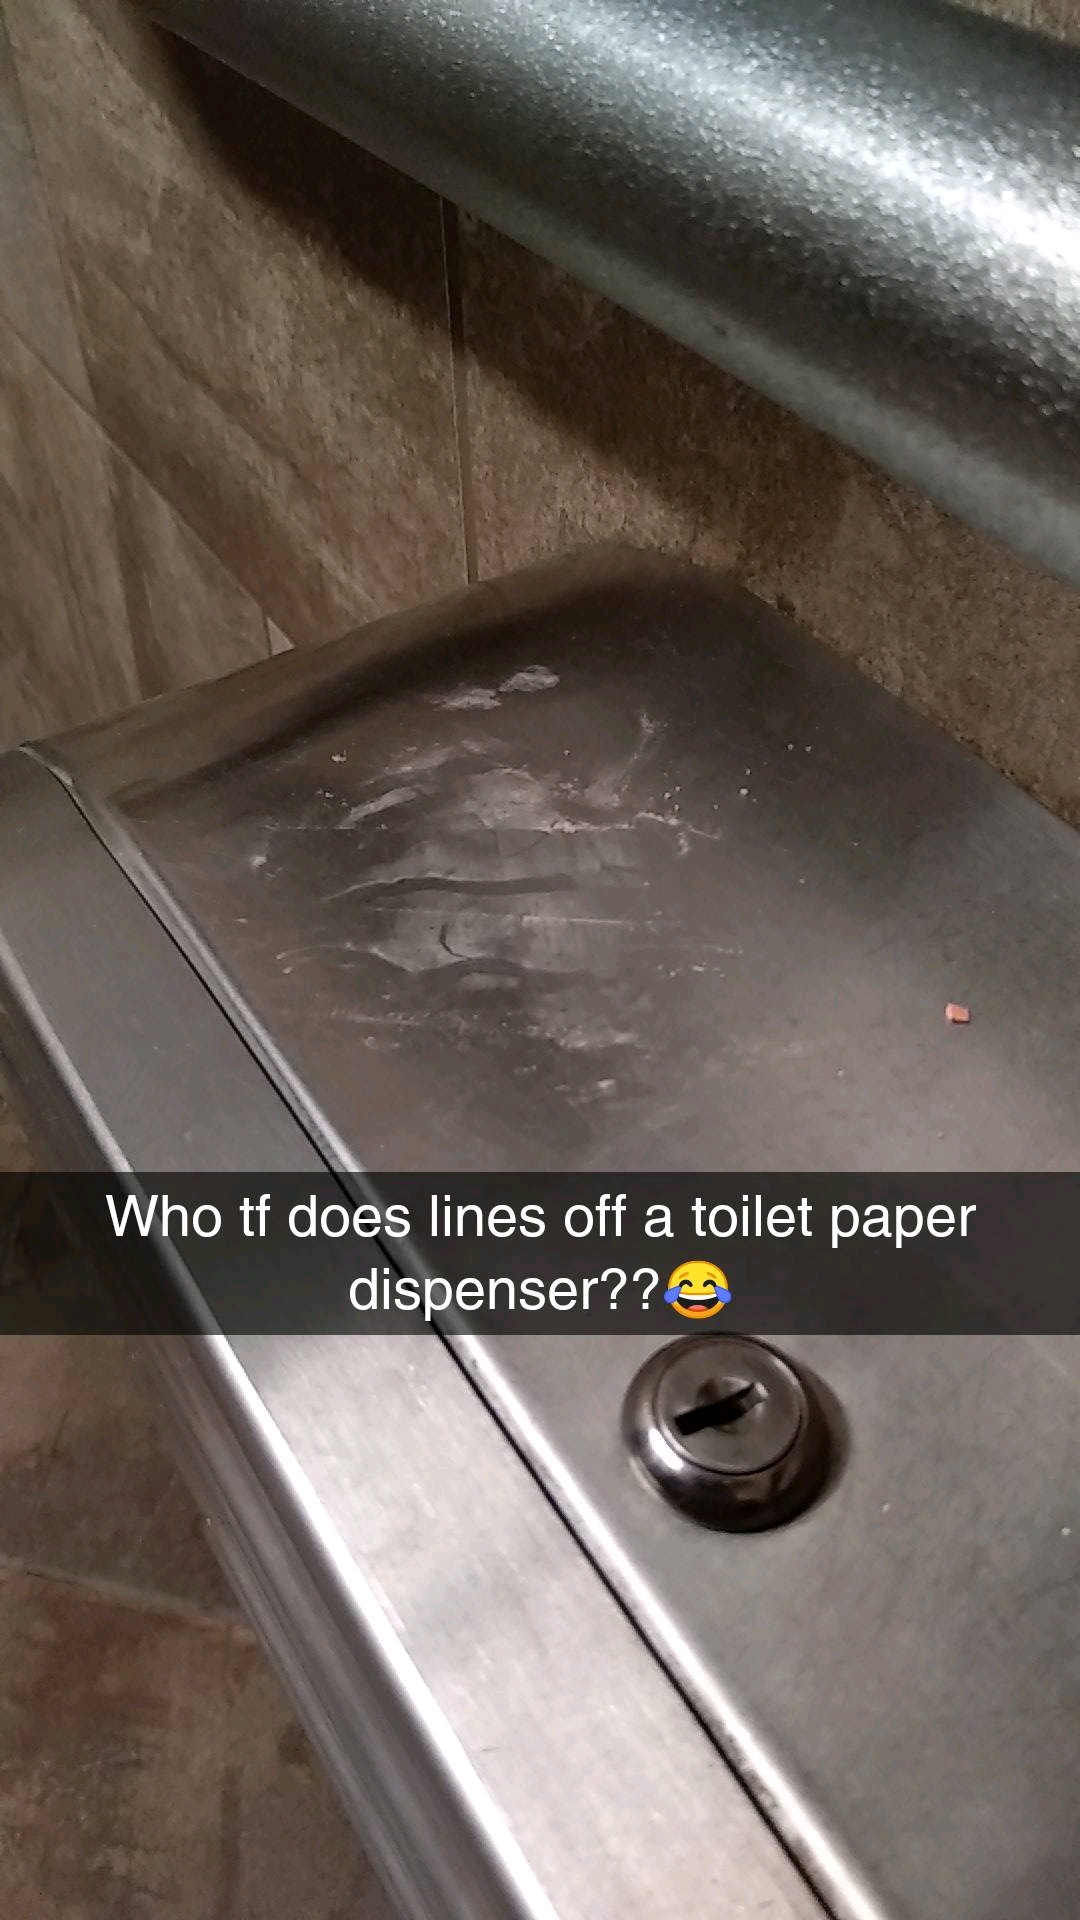 floor - Who tf does lines off a toilet paper dispenser??